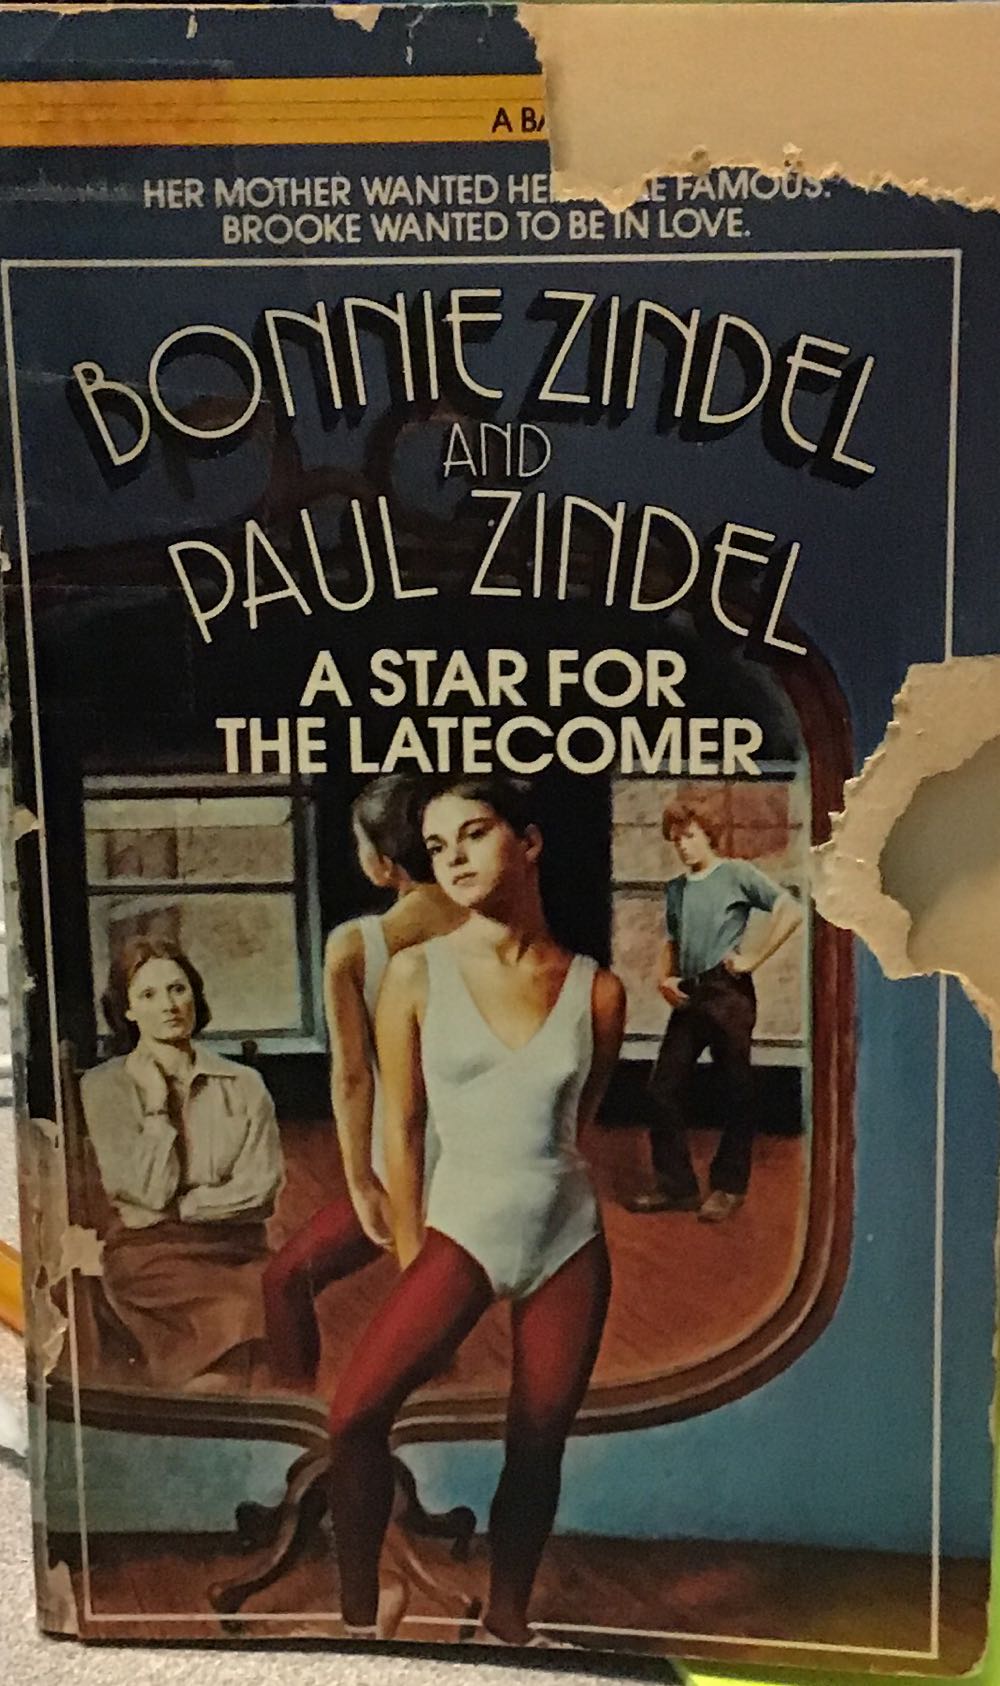 A Star for the Latecomer - Paul Zindel (Bantam Books) book collectible [Barcode 9780553255782] - Main Image 1